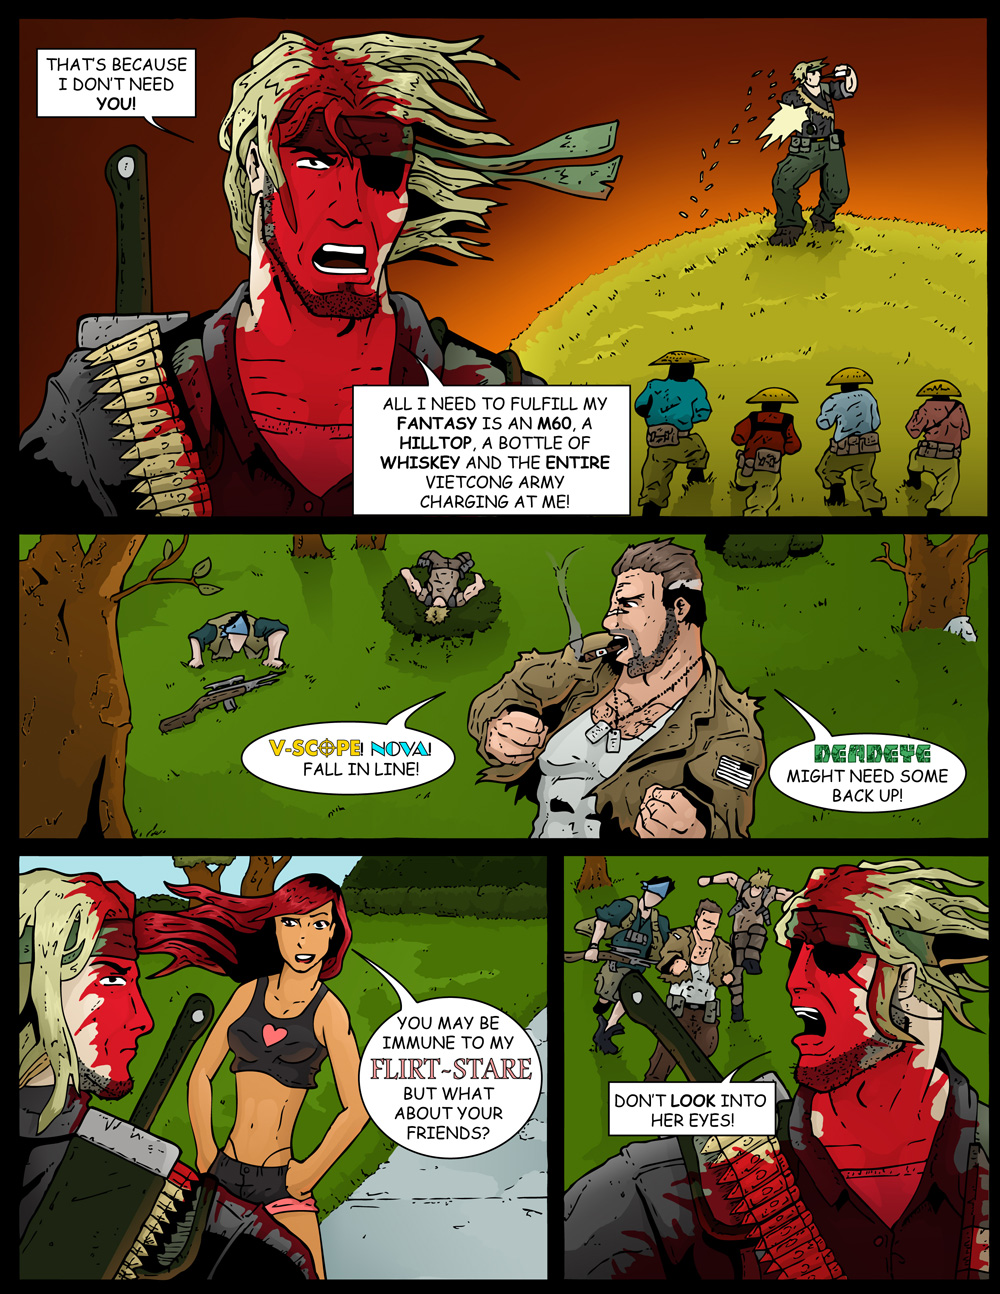 MISSION 002: PAGE 11 “I DON’T NEED YOU”